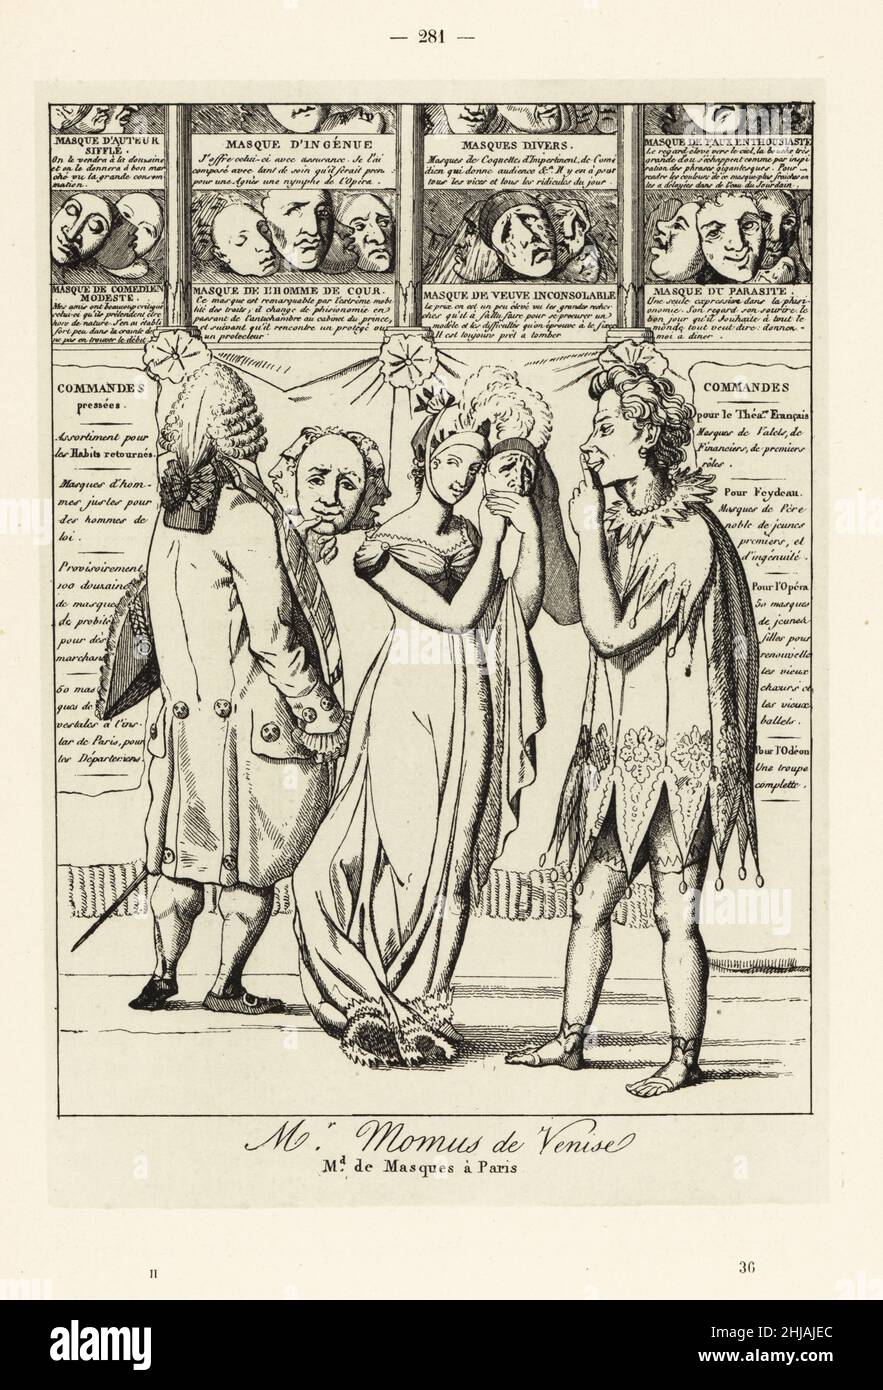 Customers trying on masks for a festival or masquerade ball, 18th century. Masks for an ingenue, modest actor, inconsolable widow, parasite, etc. Orders from the Theatre Francais, Feydeau, Opera, Odeon. Flyer for the Paris shop of mask-seller Mr Momus of Venice, published by Auger. M. Momus de Venise. Marchand de Masques a Paris. Lithograph from Henry Rene d’Allemagne’s Recreations et Passe-Temps, Games and Pastimes, Hachette, Paris, 1906. Stock Photo